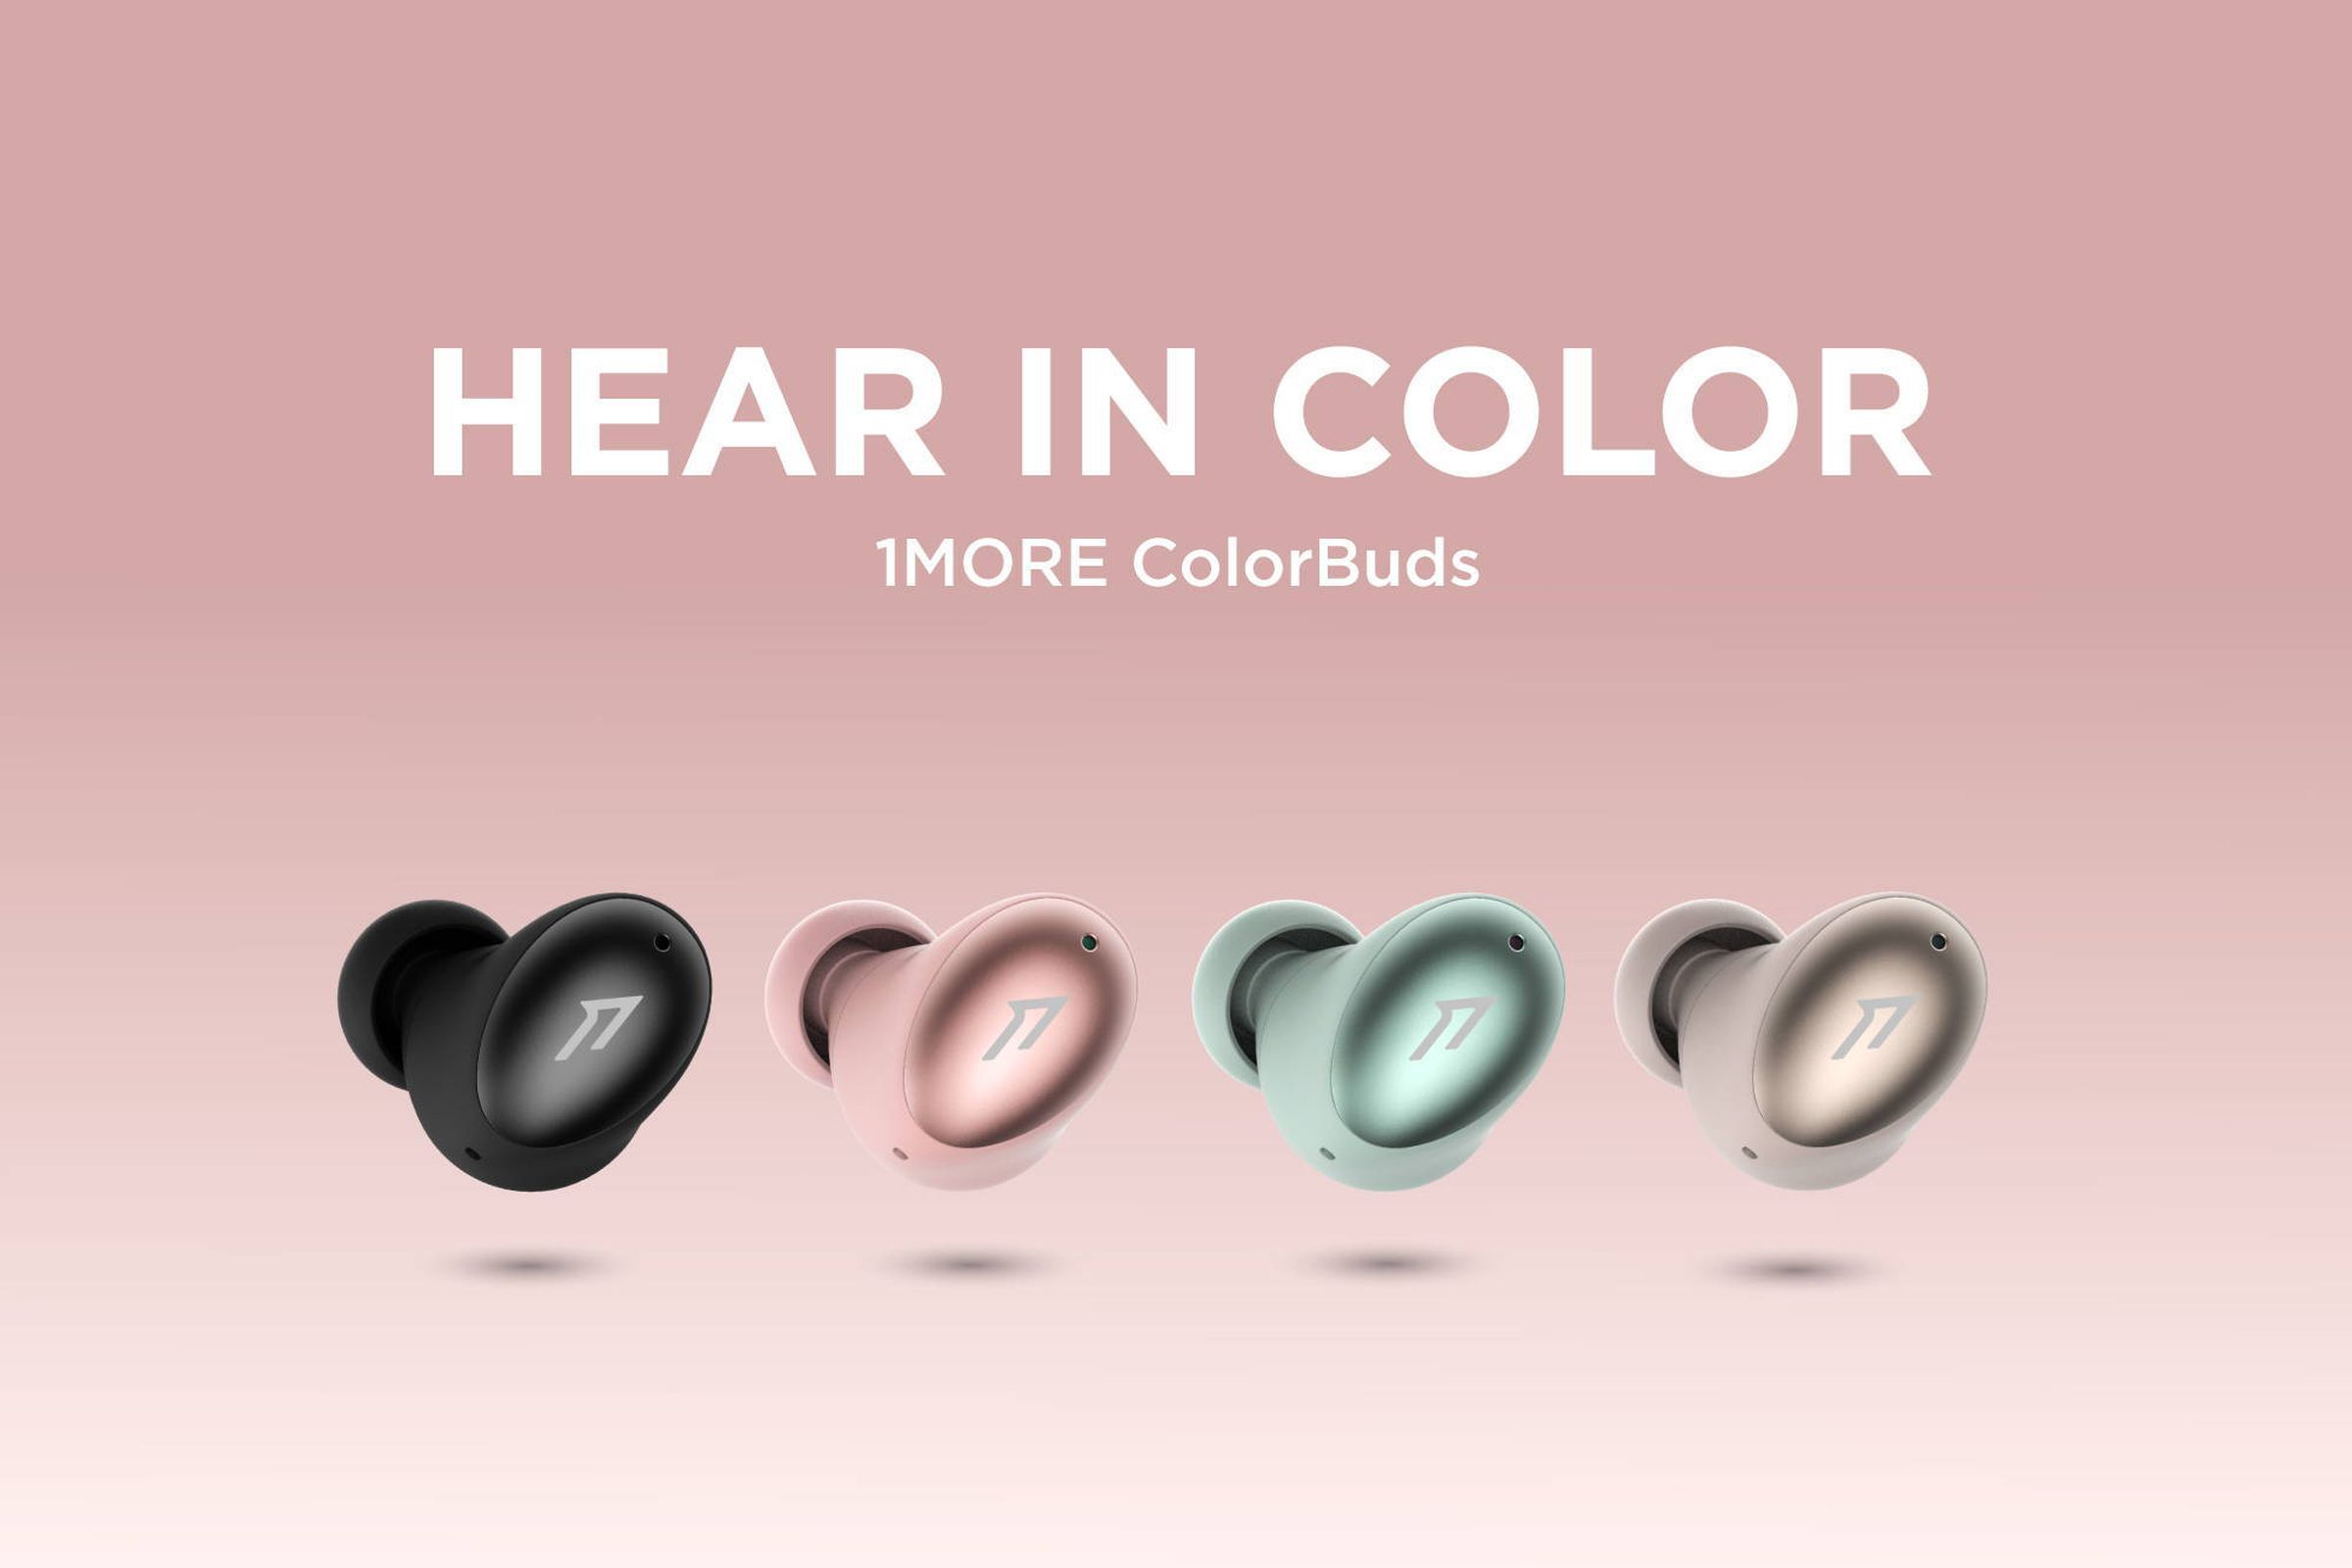 The ColorBuds True Wireless are available in black, gold, pink, and green.